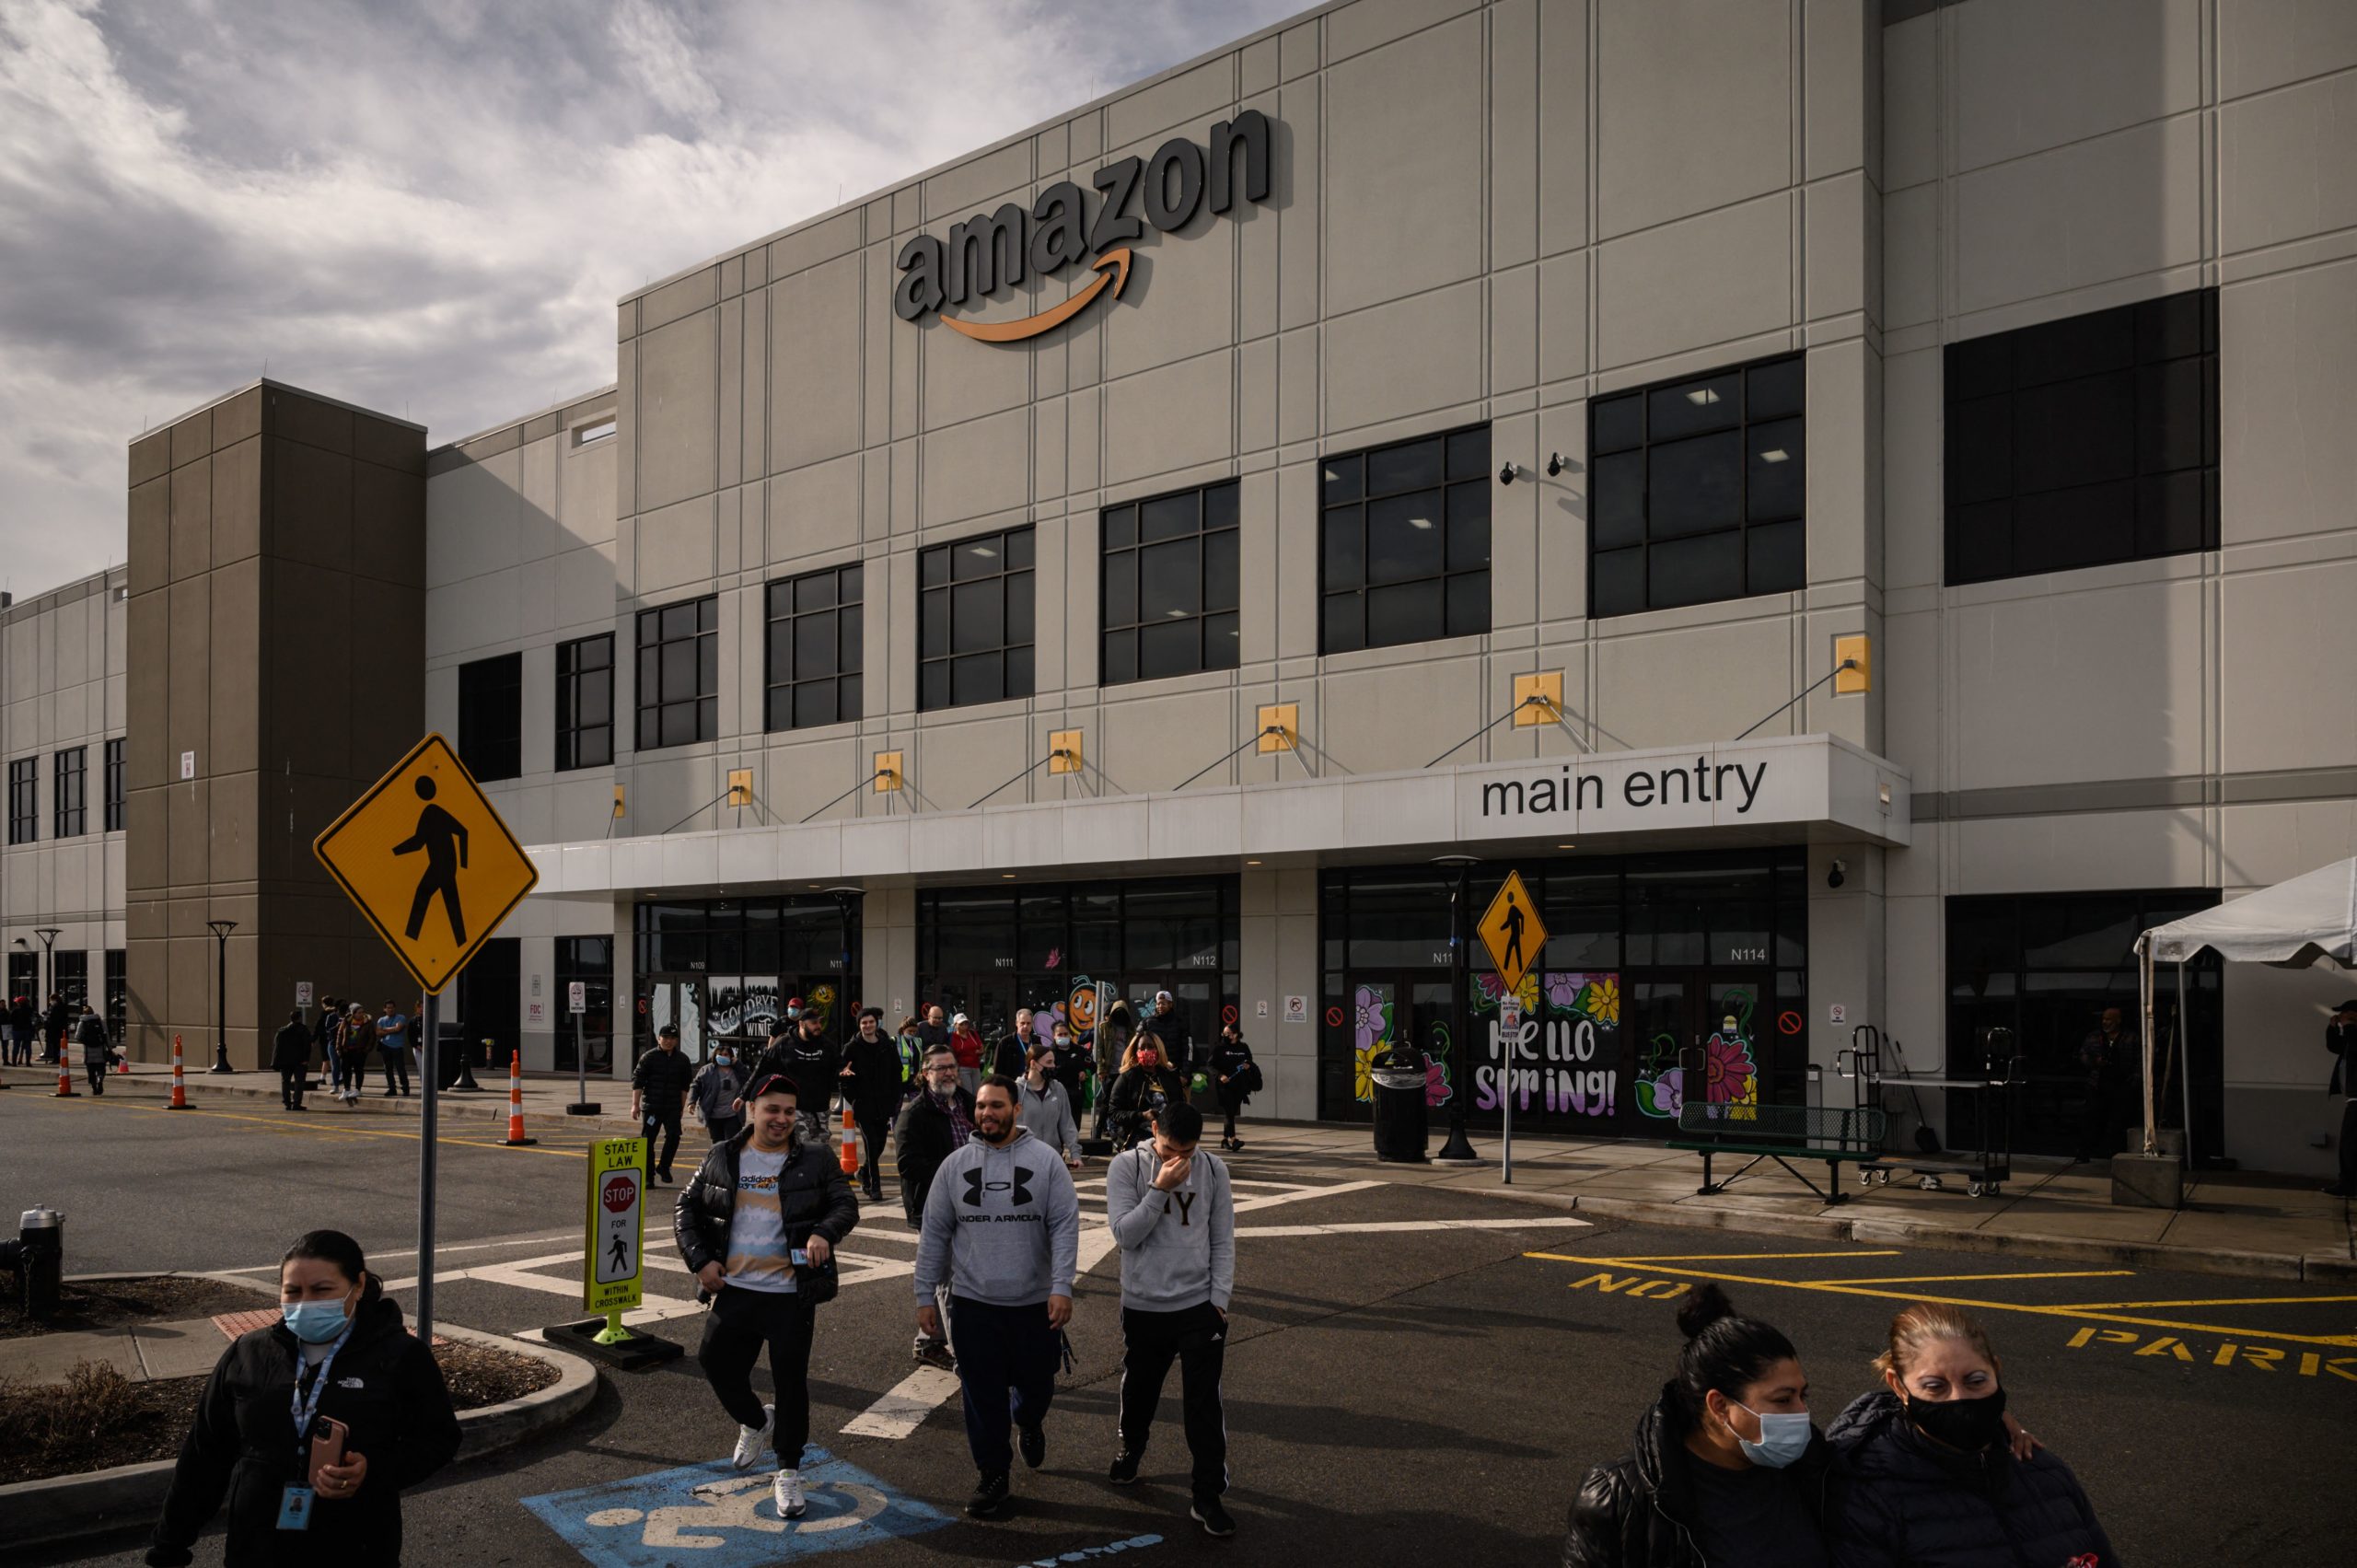 Workers walk to cast their votes over whether or not to unionize, outside an Amazon warehouse in Staten Island on March 25, 2022. (Photo by ED JONES/AFP via Getty Images)